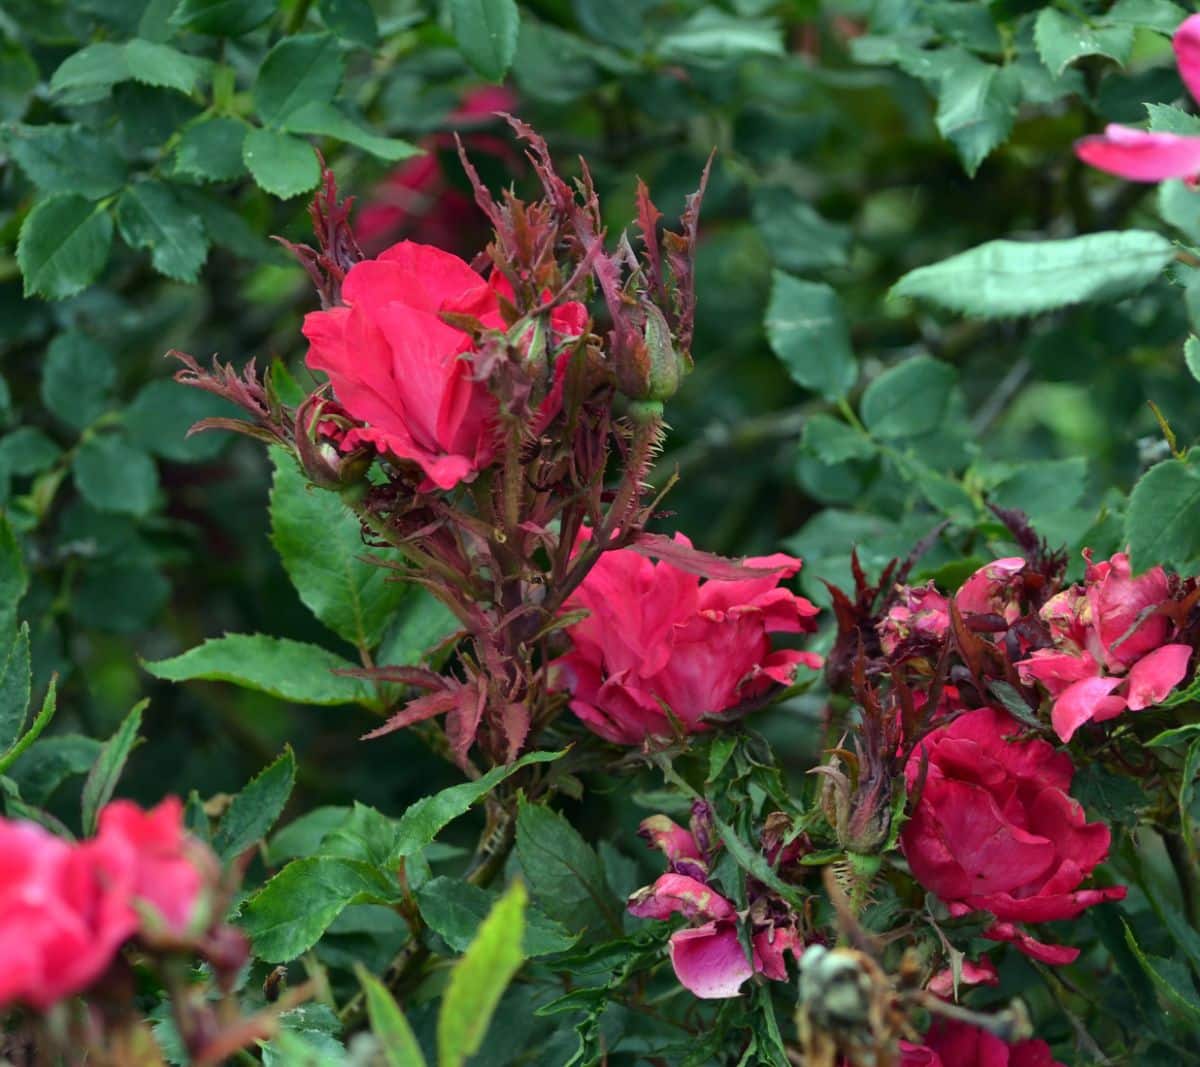 A rose bush infected with Rose Rosette disease